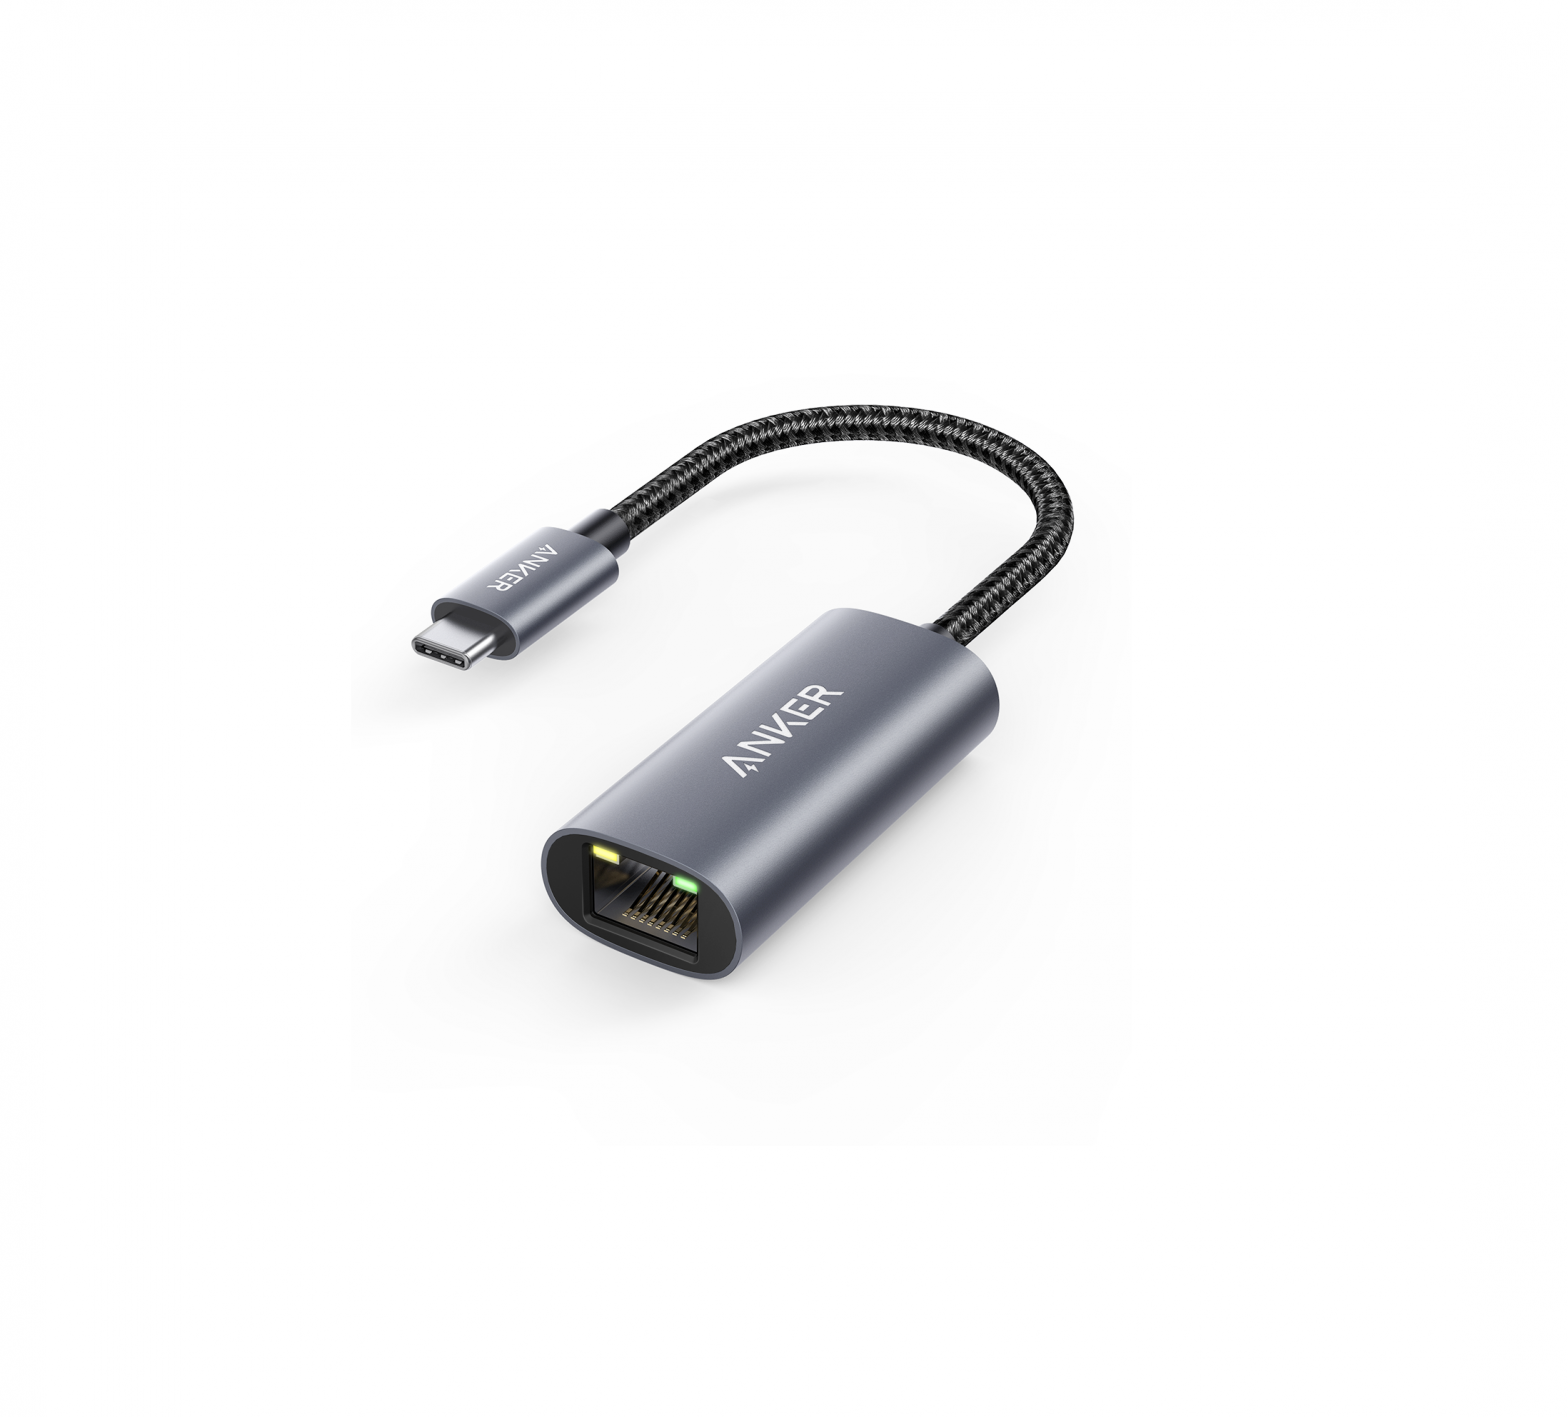 ANKER A8313 PowerExpand USB-C to Gigabit Ethernet Adapter User Manual